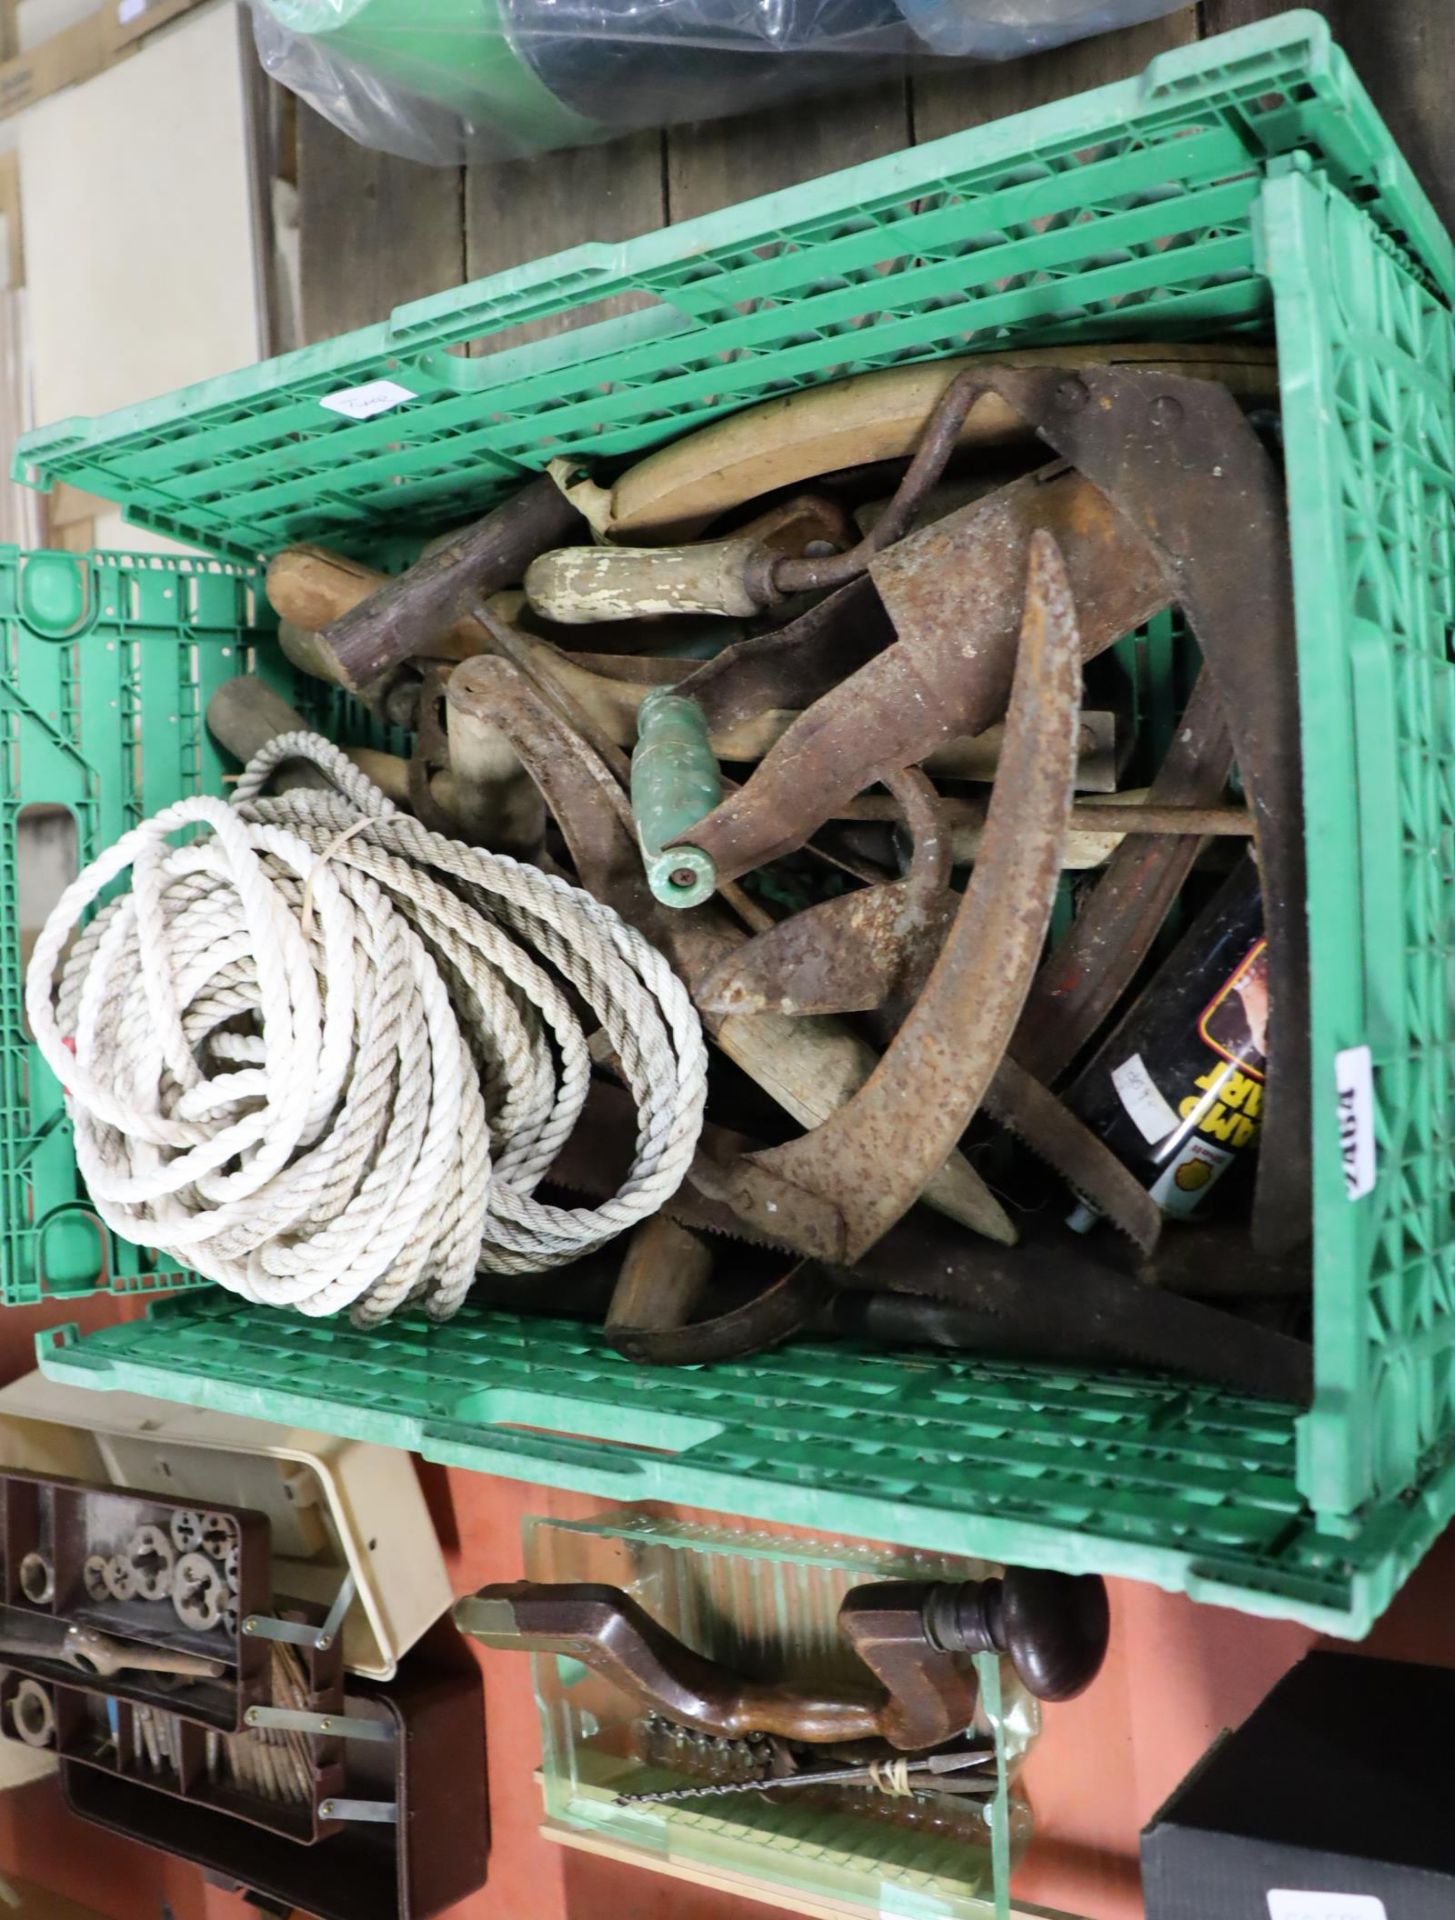 Green crate containing mixed garden hand tools